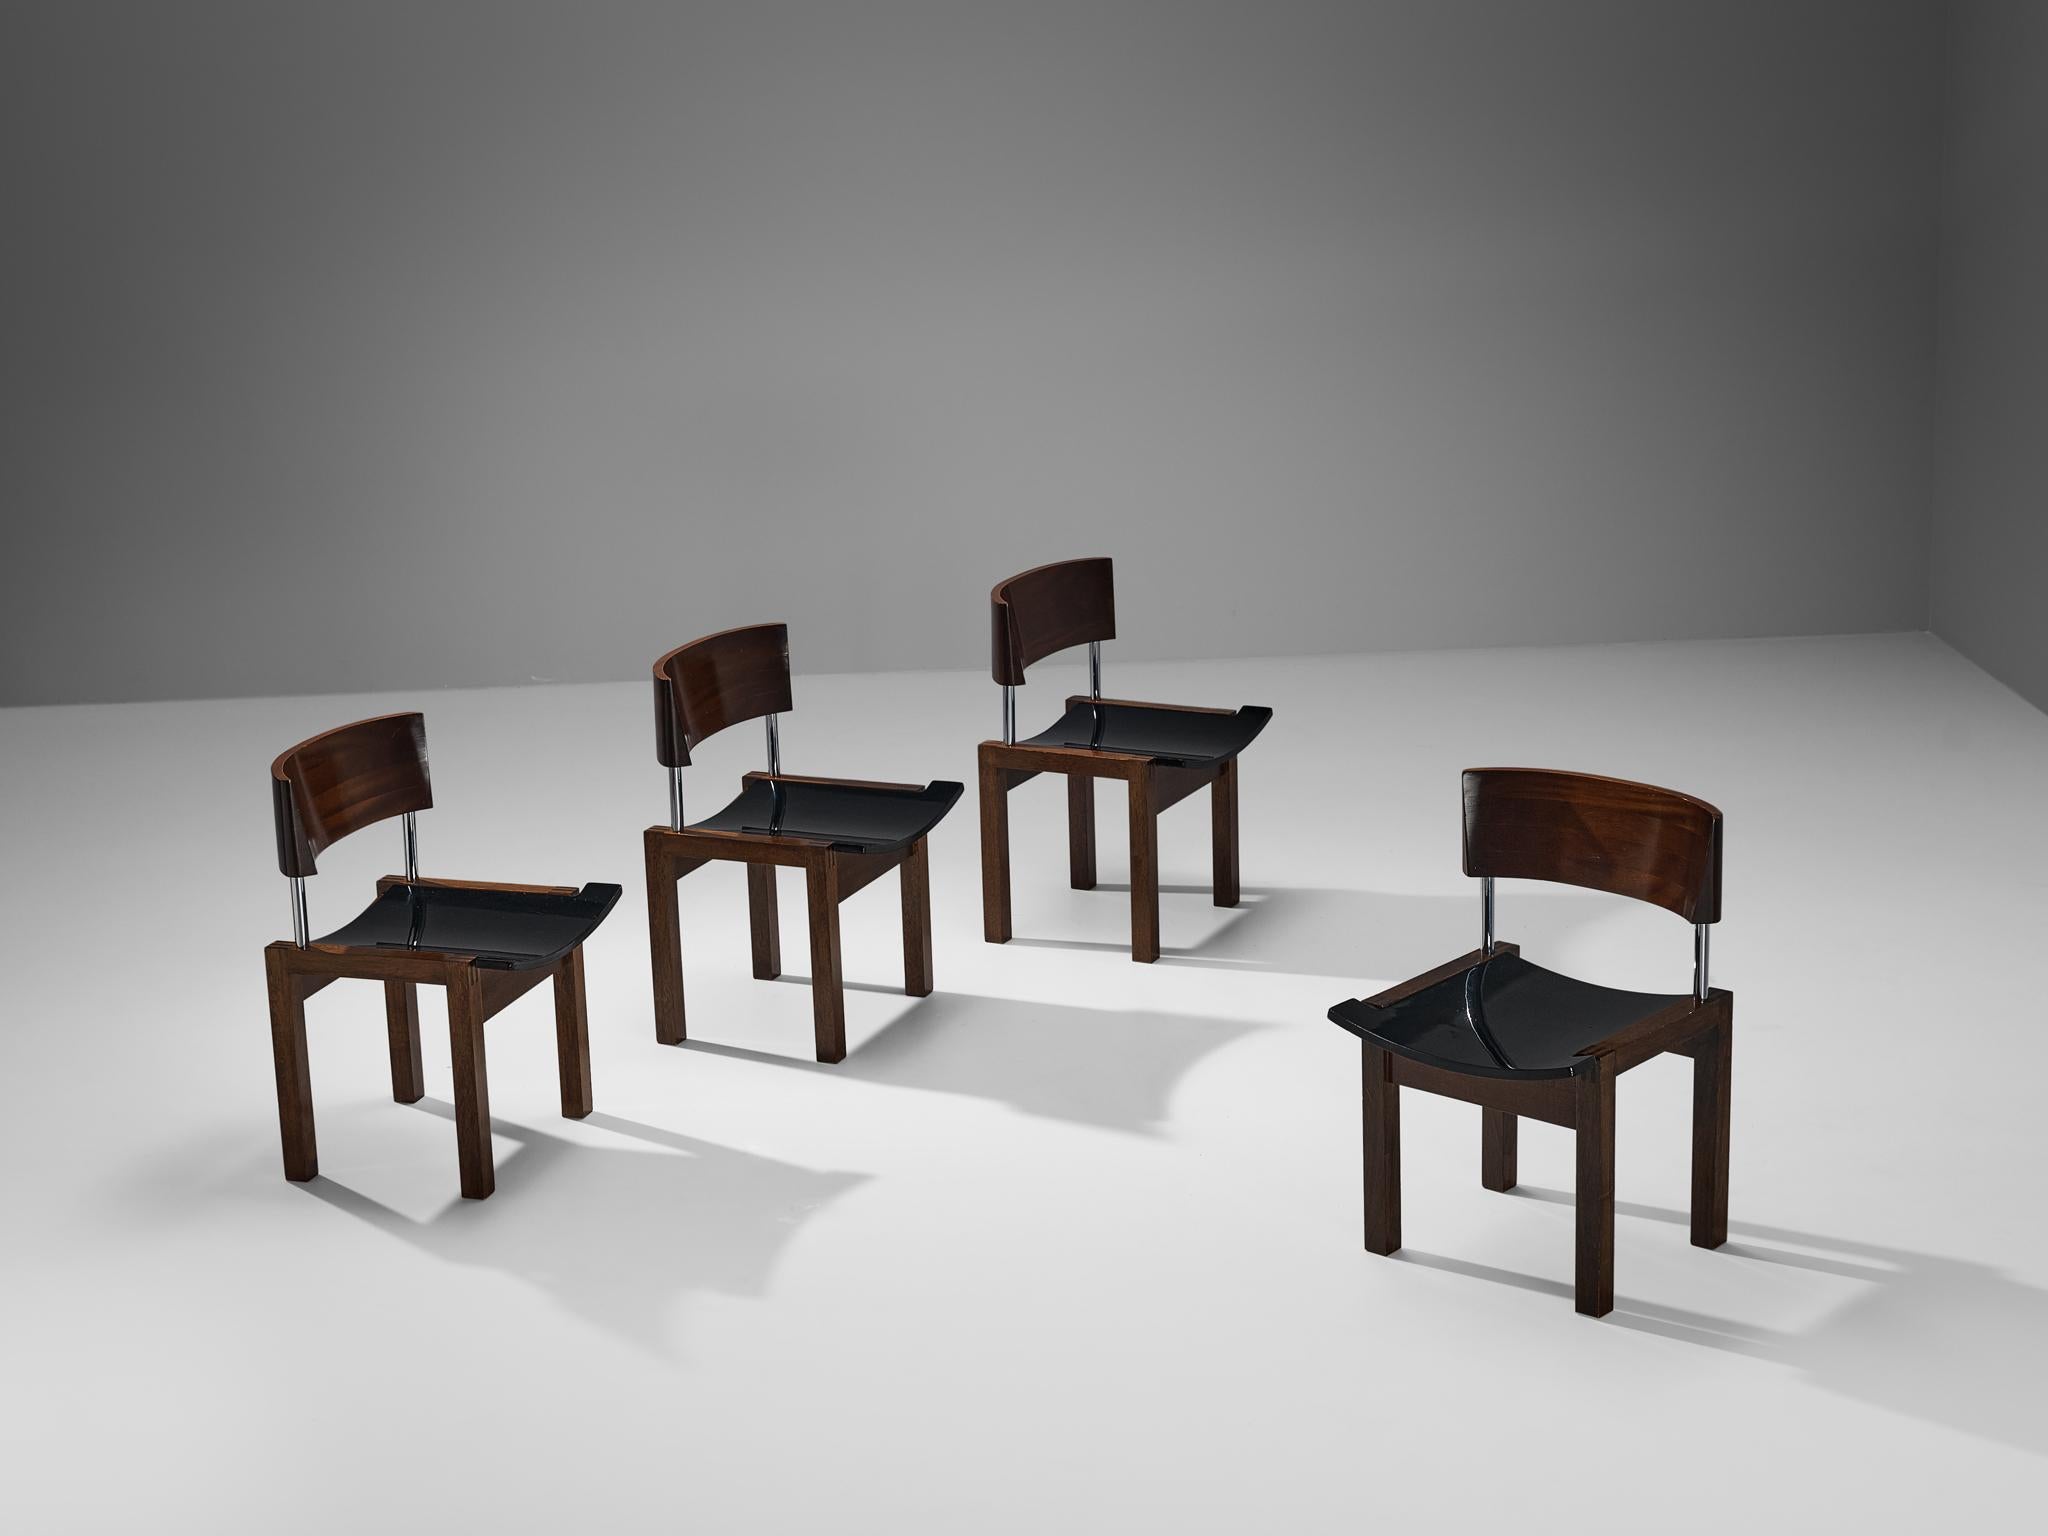 Set of four dining chairs, black lacquered wood, wood, Italy, 1970s

Set of four dining chairs with interesting features, made in Italy in the 1970s. This design is unusual and special to come by, because of the shape and mix of materials used to